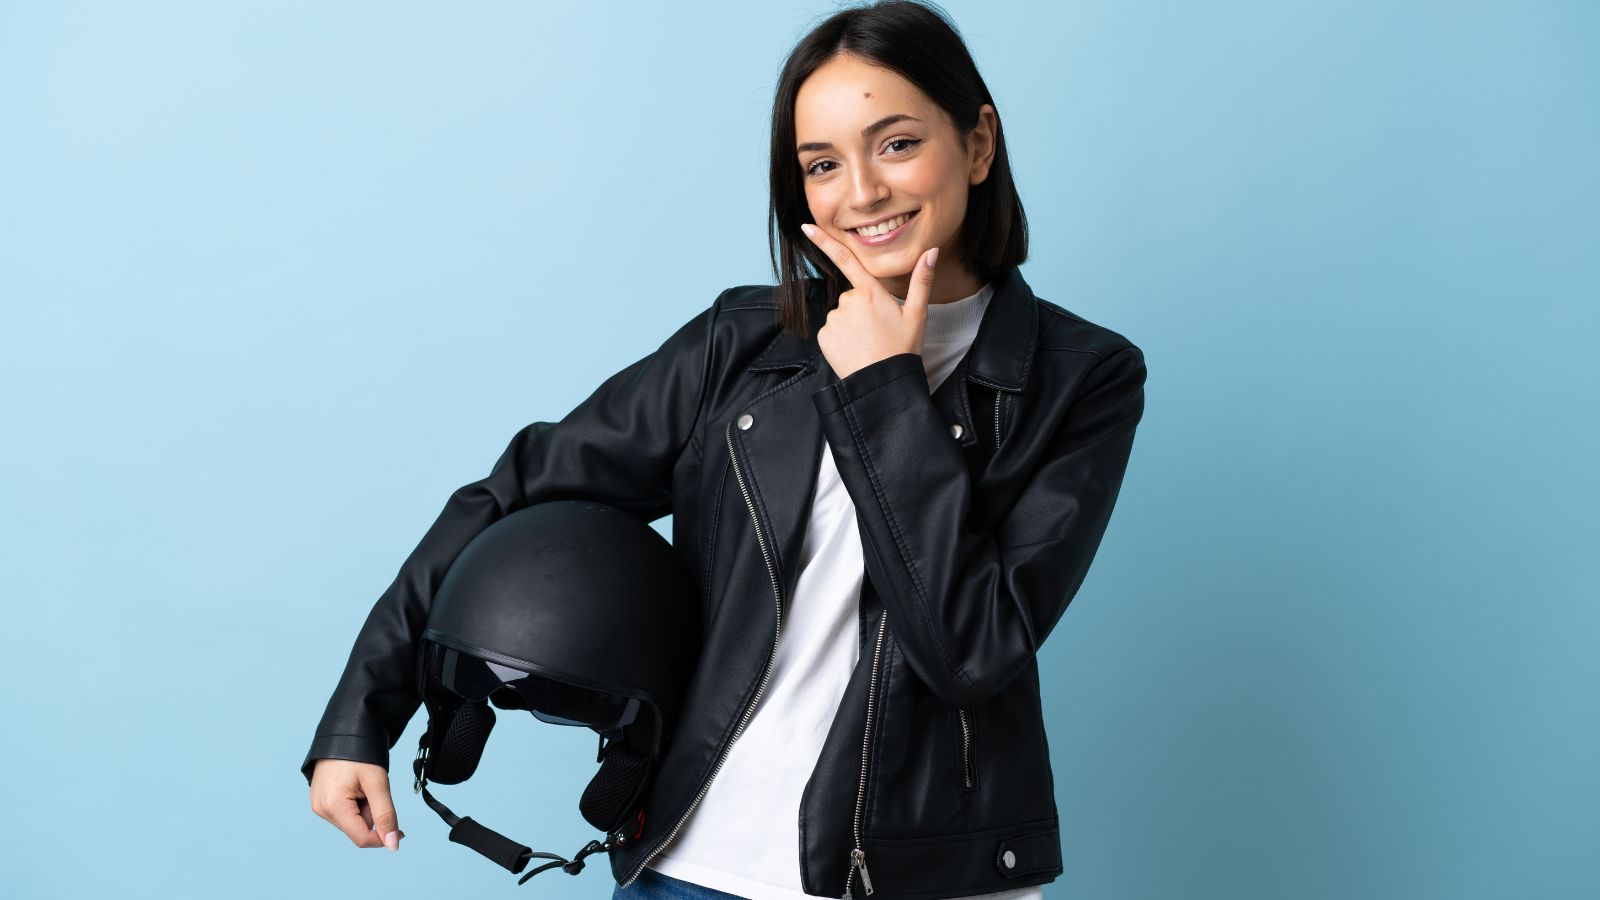 How to Choose Your First Motorcycle as a Woman: A Confident and Knowledgeable Guide